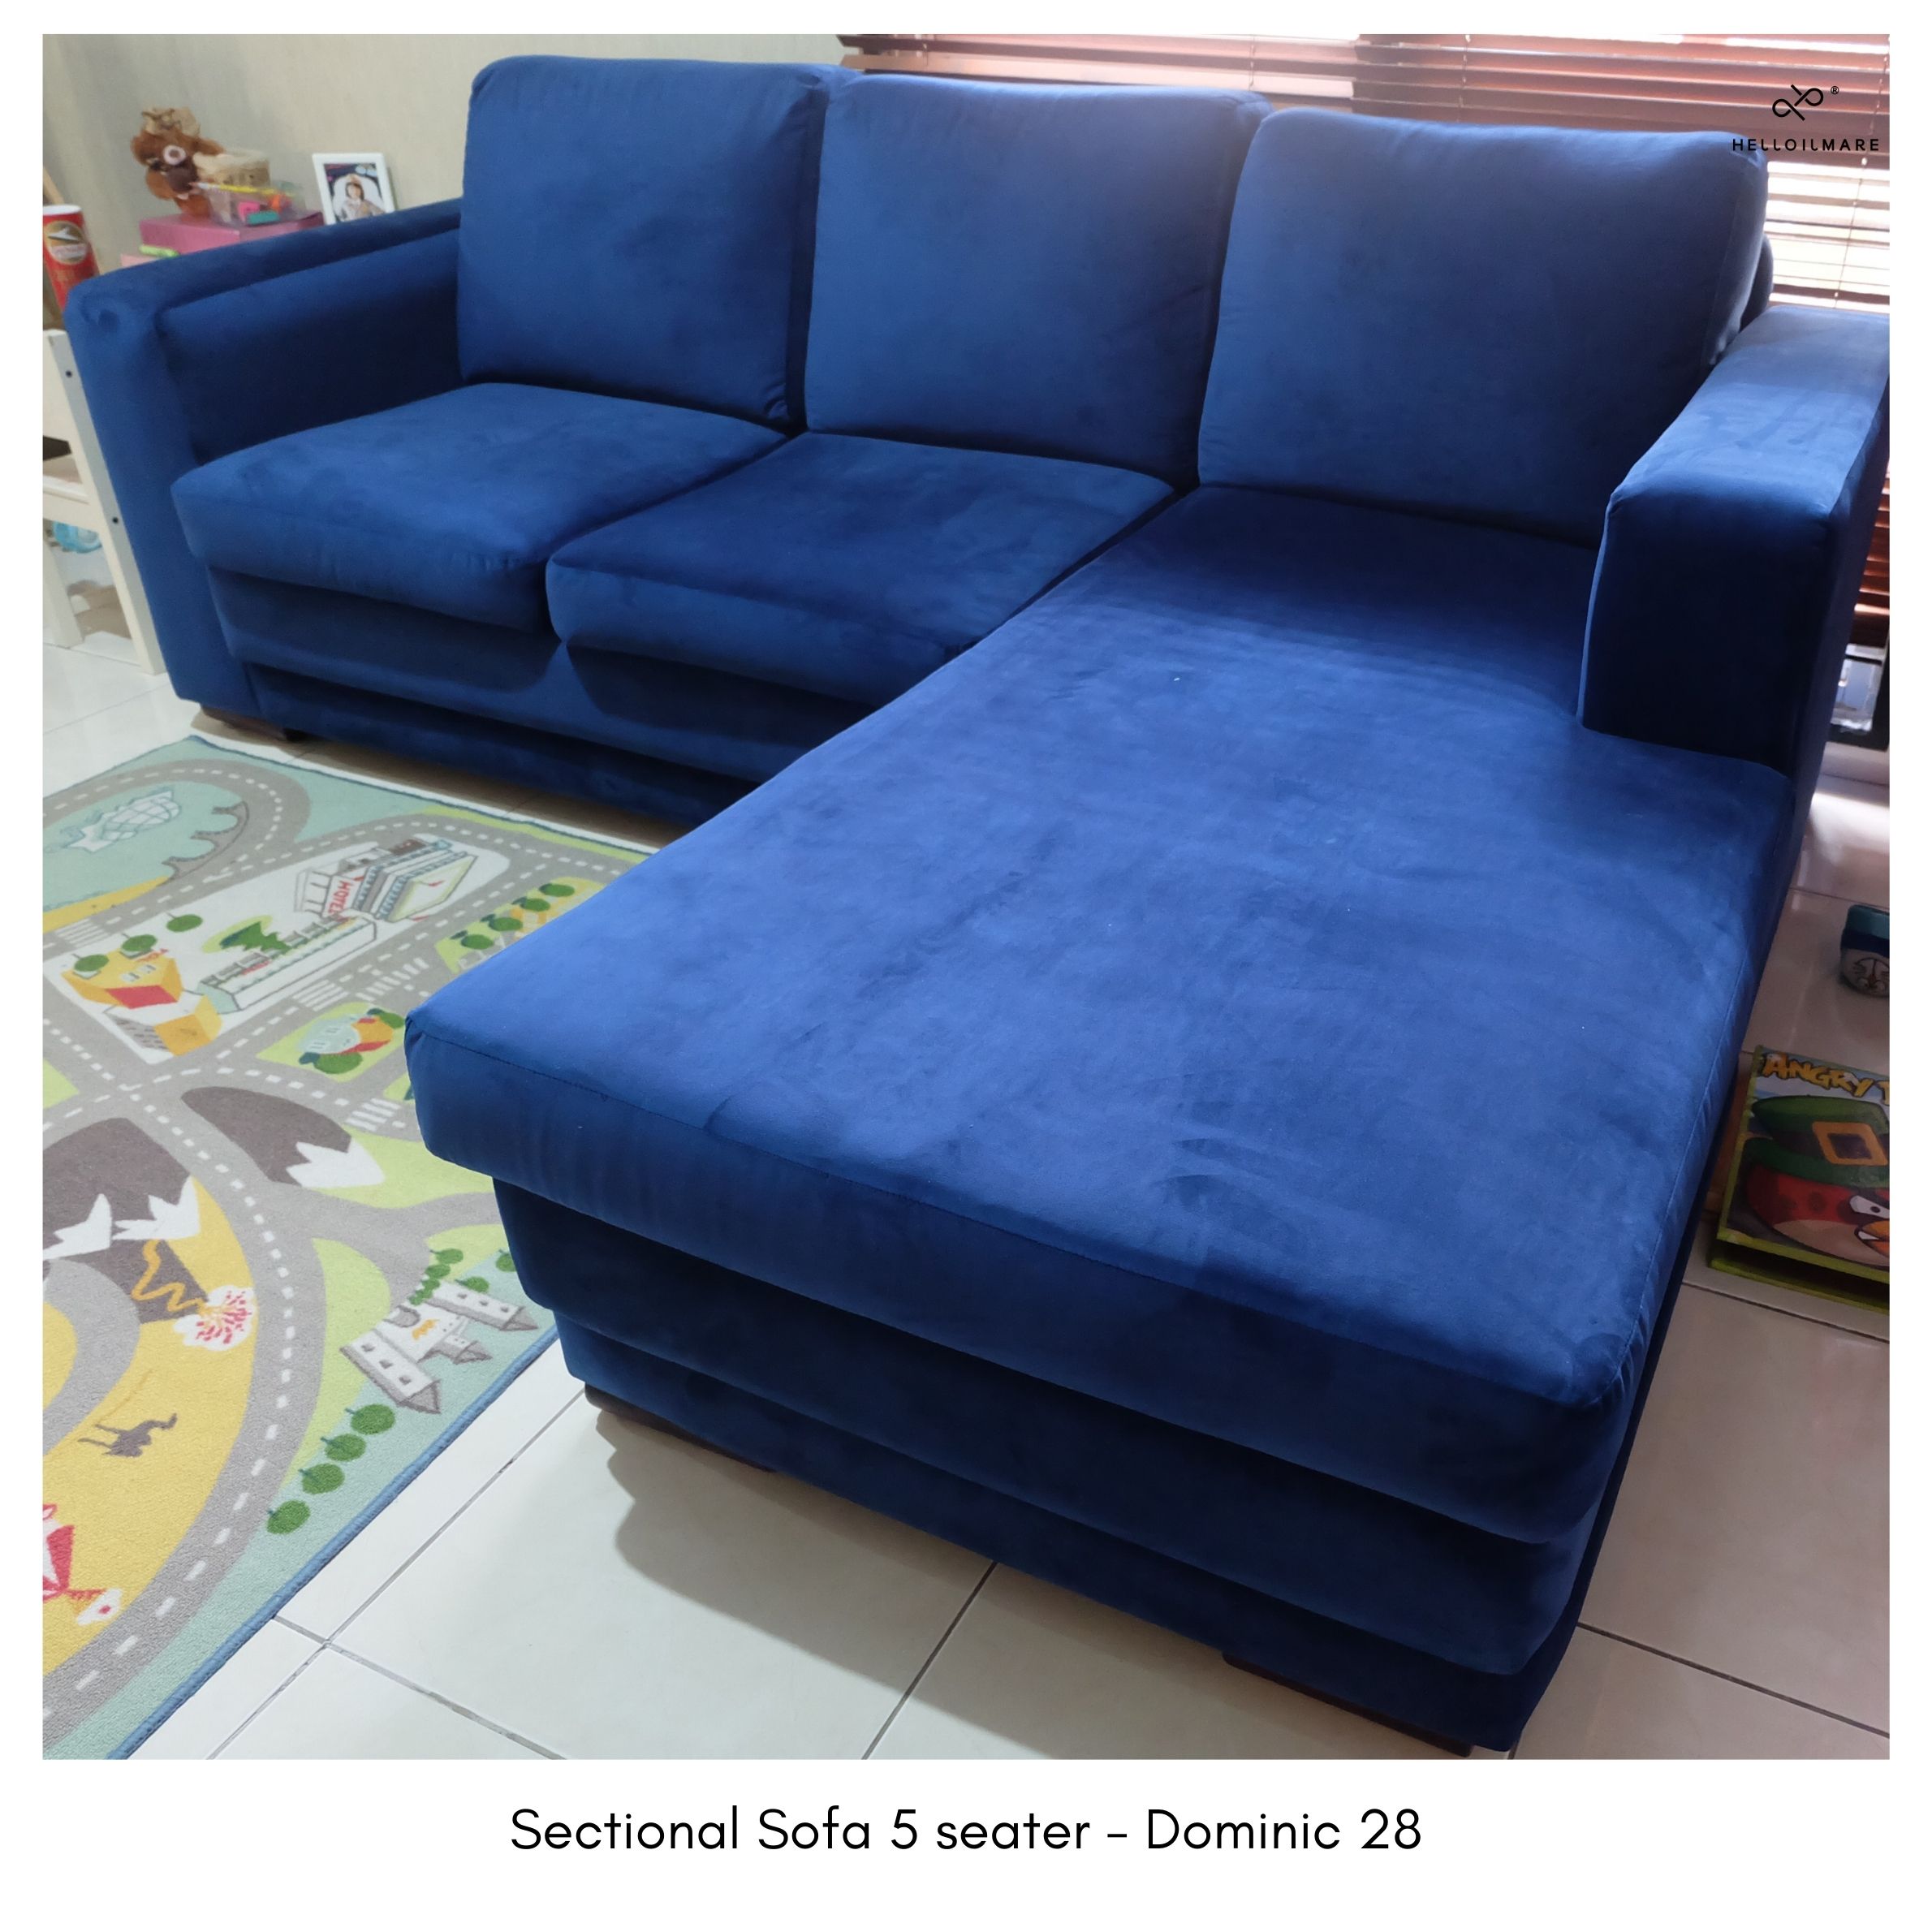 Sectional Sofa 5 Seater